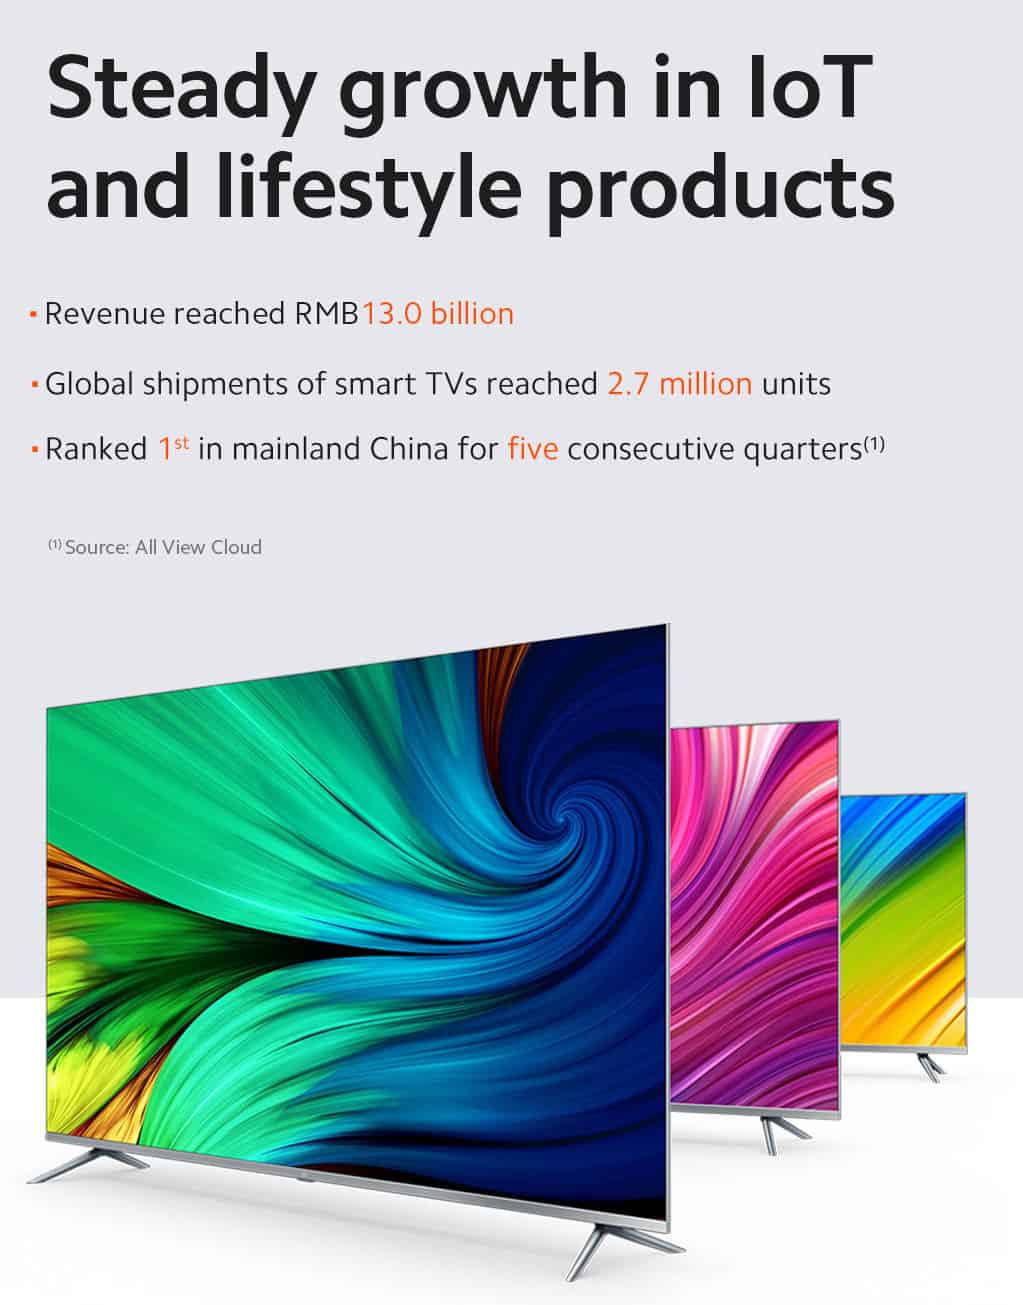 https://www.techoffside.com/wp-content/uploads/2020/05/Q1_earnings-infographic_res_2.jpg